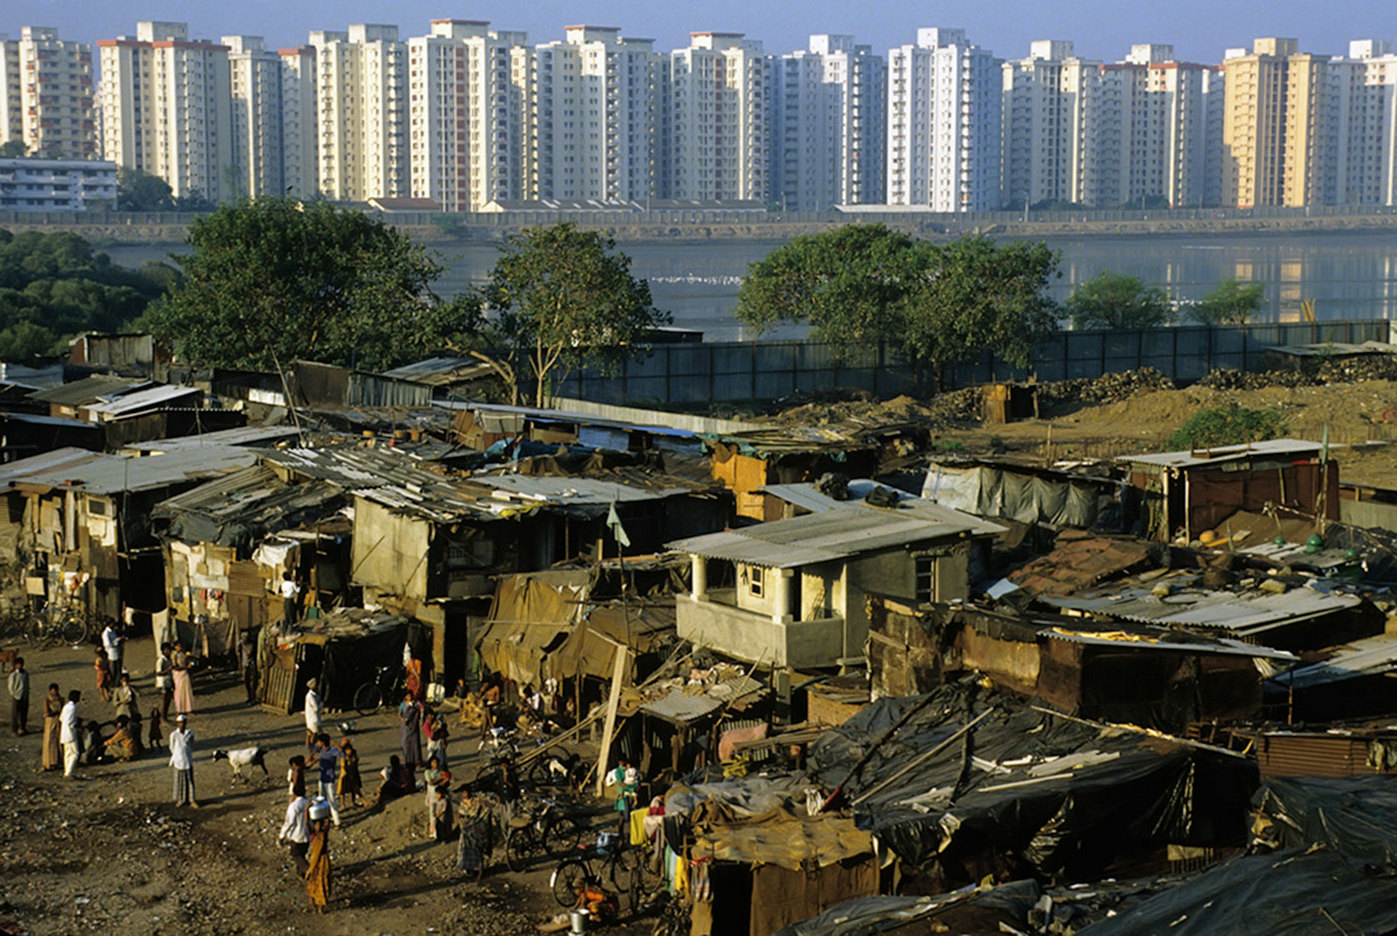 Mumbai slums in front of Cuffe Parade luxury condos :  DAILY LIFE; The Rich, the Poor & the Others : Viviane Moos |  Documentary Photographer